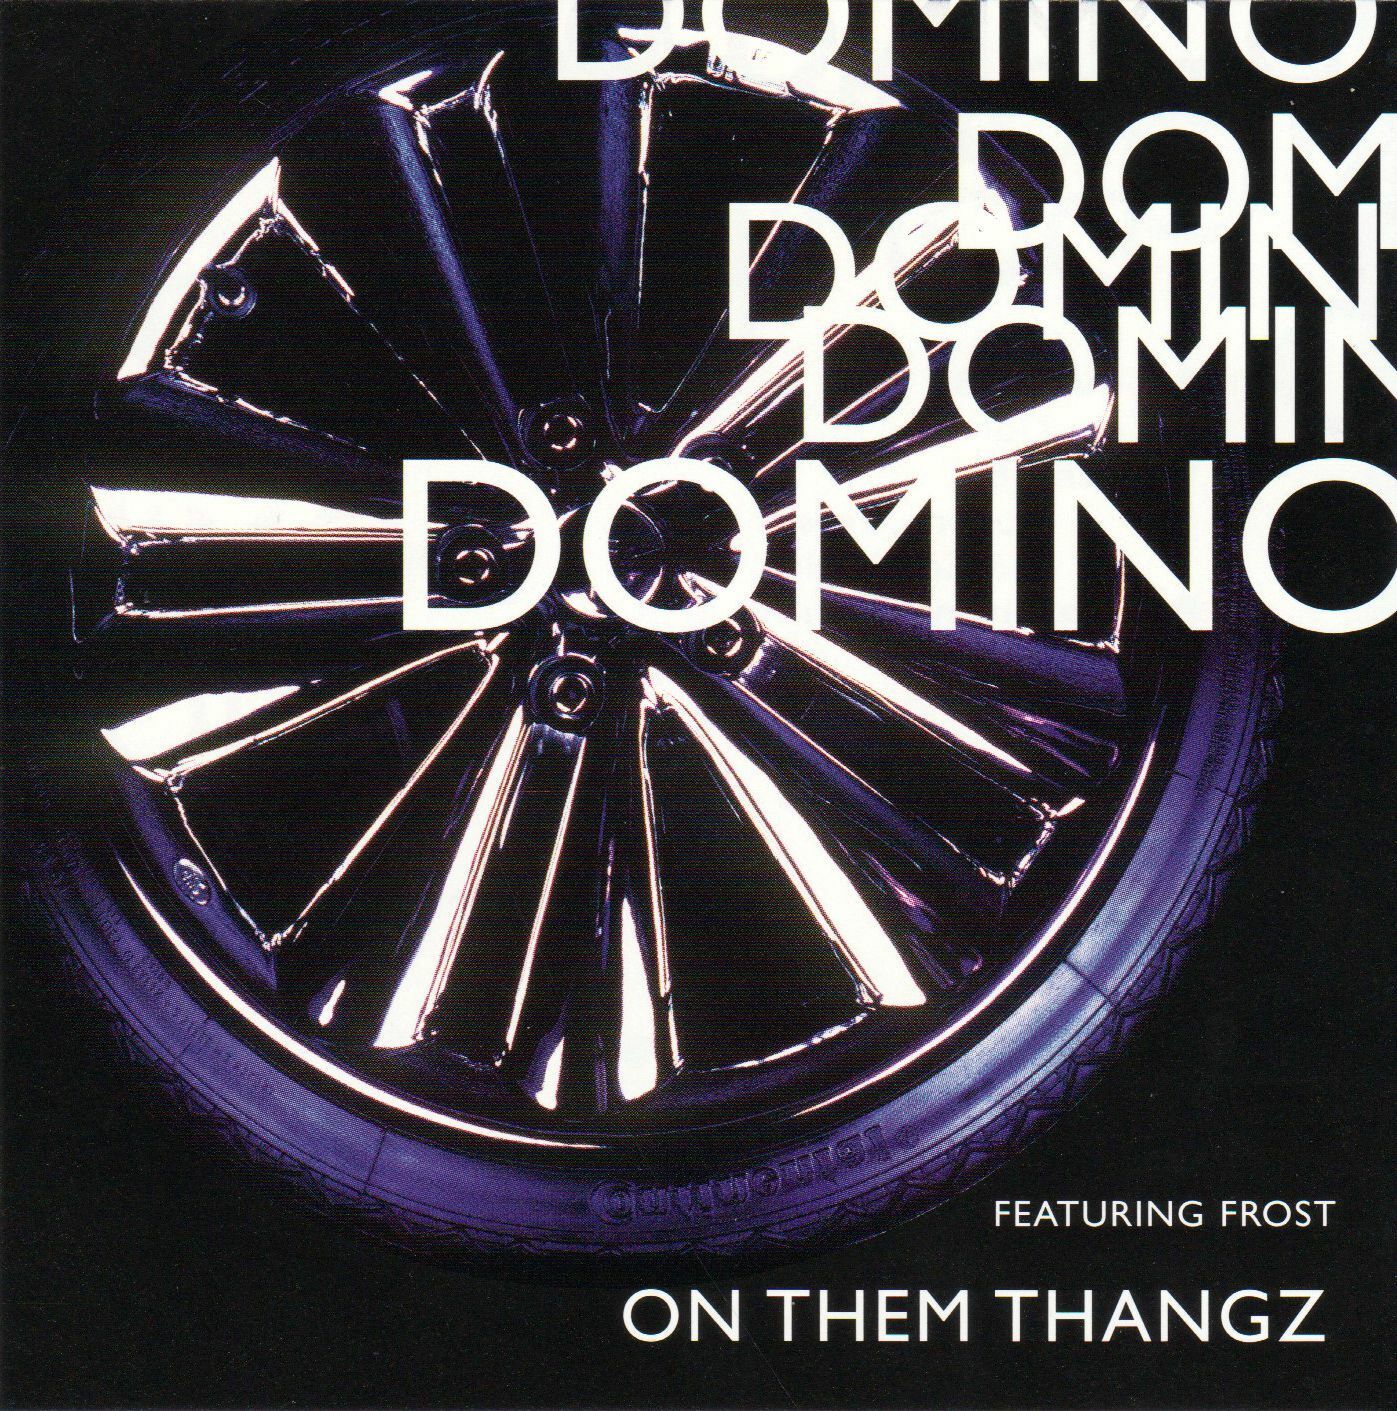 On Them Thangz [Single] by Domino featuring Frost (CD, 1997, Thug)